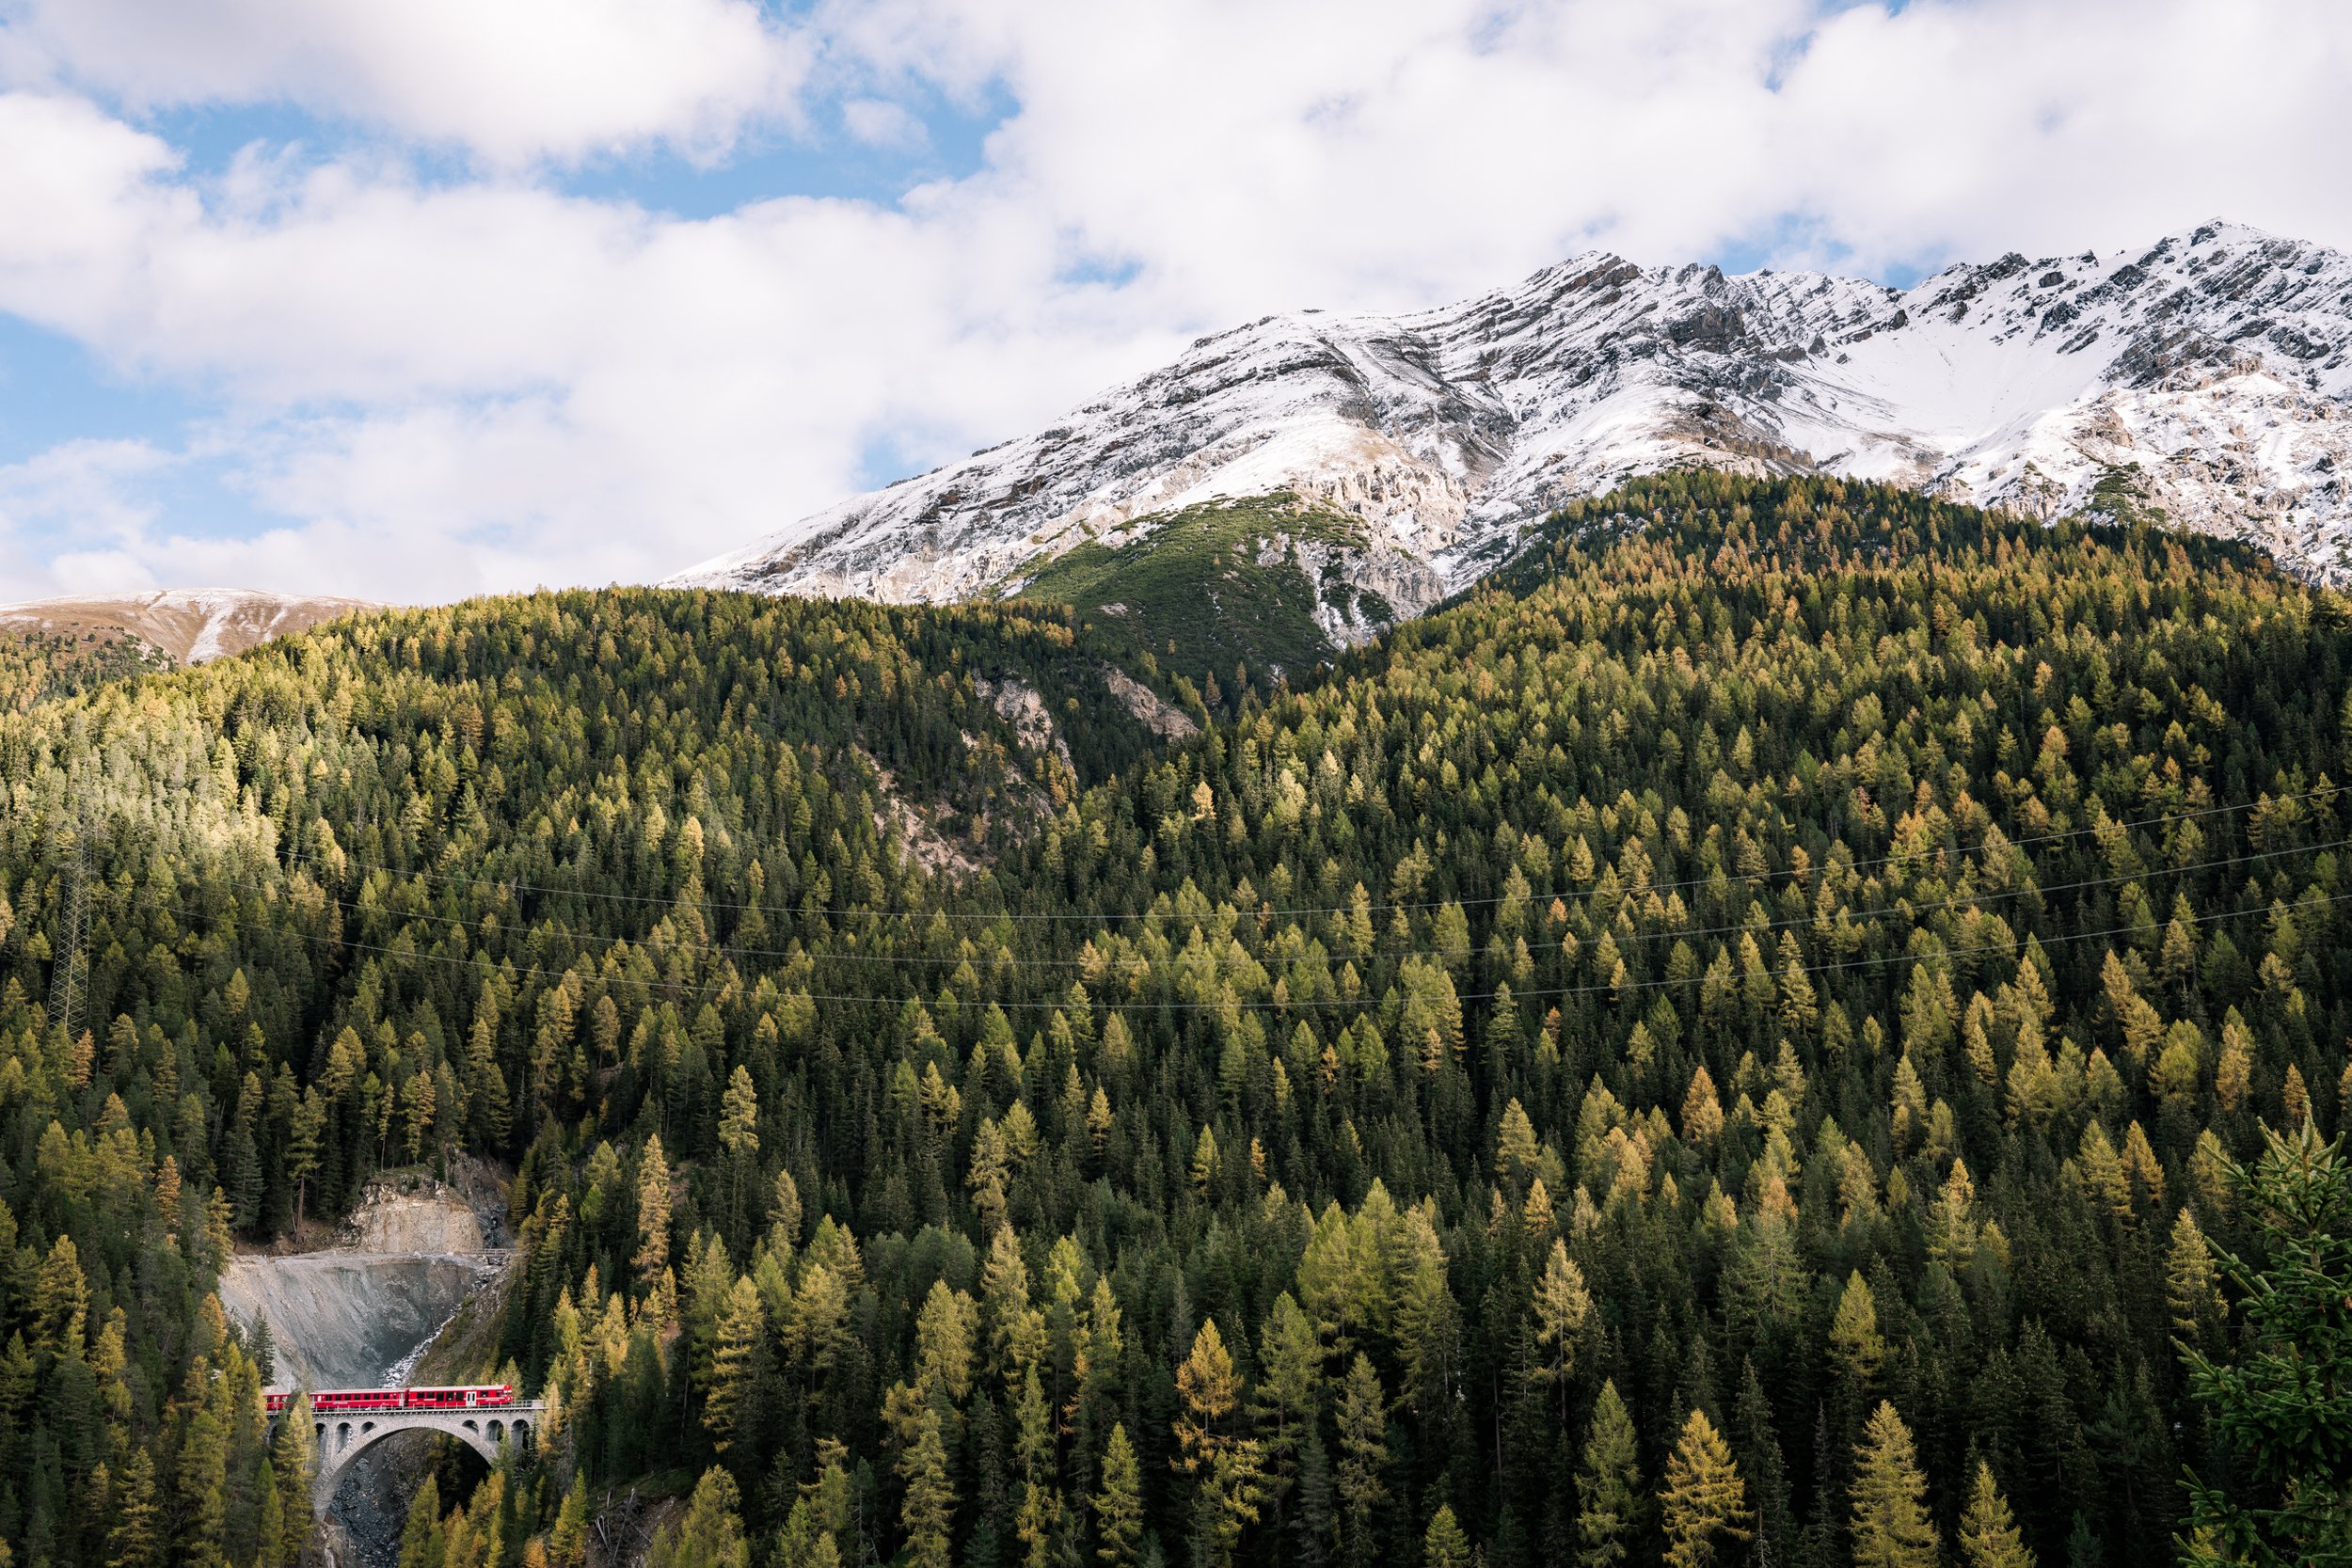  The local train running through spectacular landscape in the Engadin valley of Switzerland. 